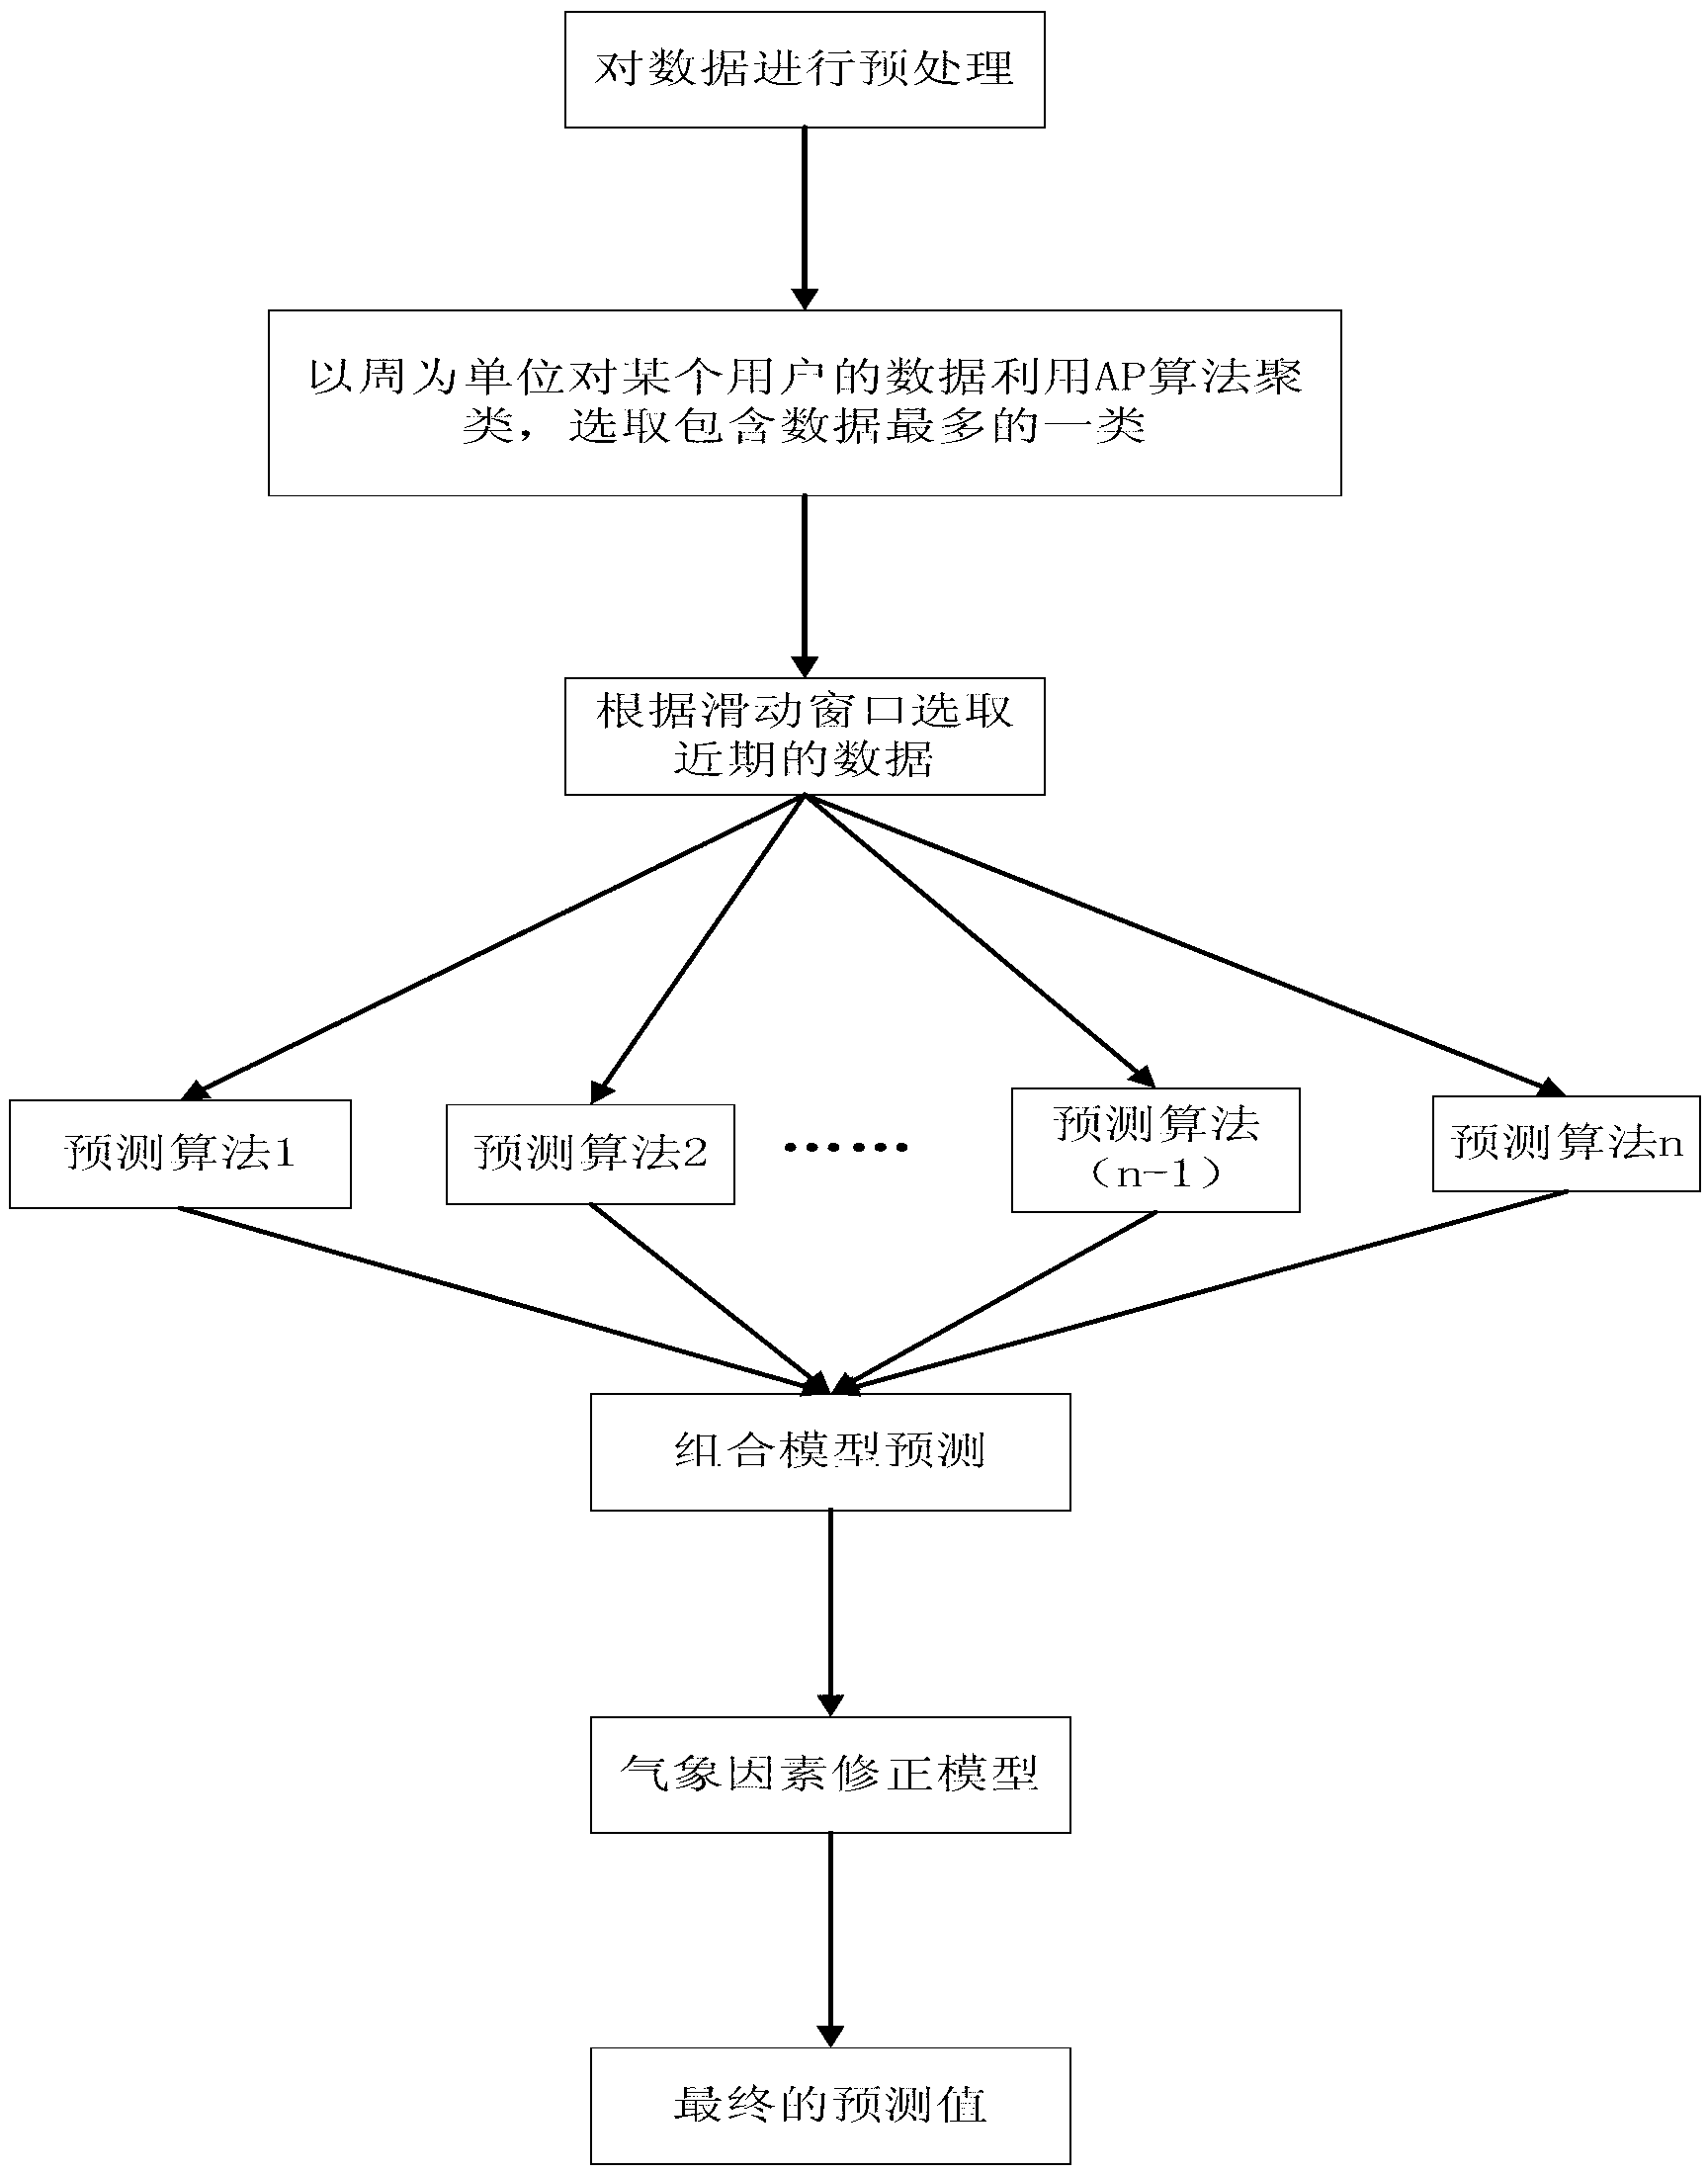 Short-term load prediction method based on clustering and sliding window